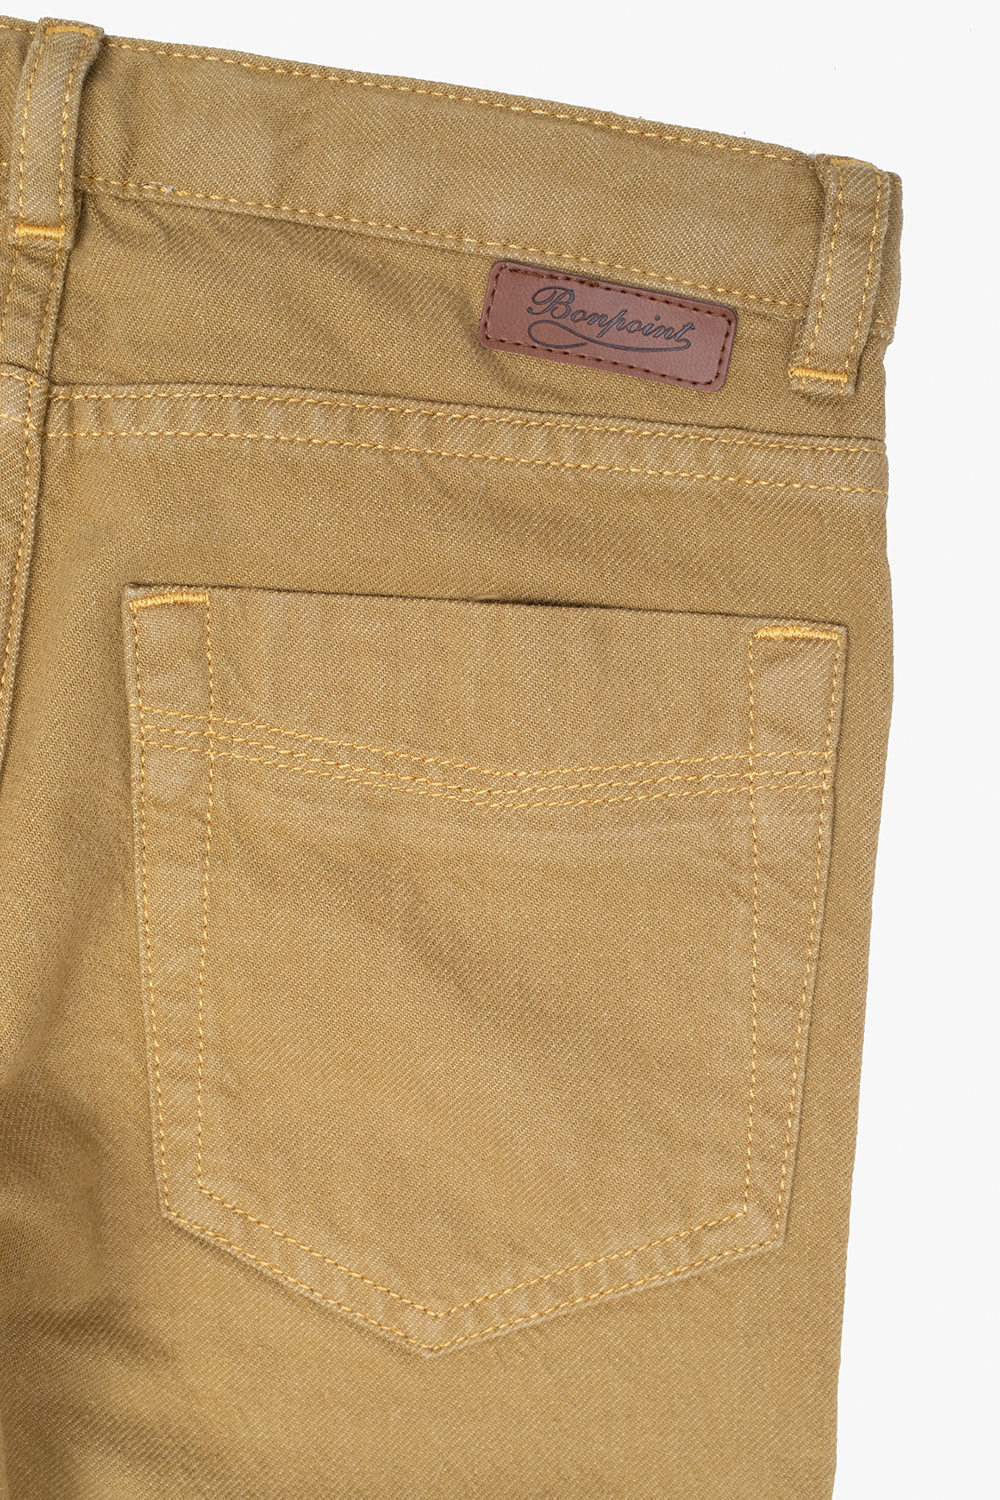 Bonpoint  Trousers with logo